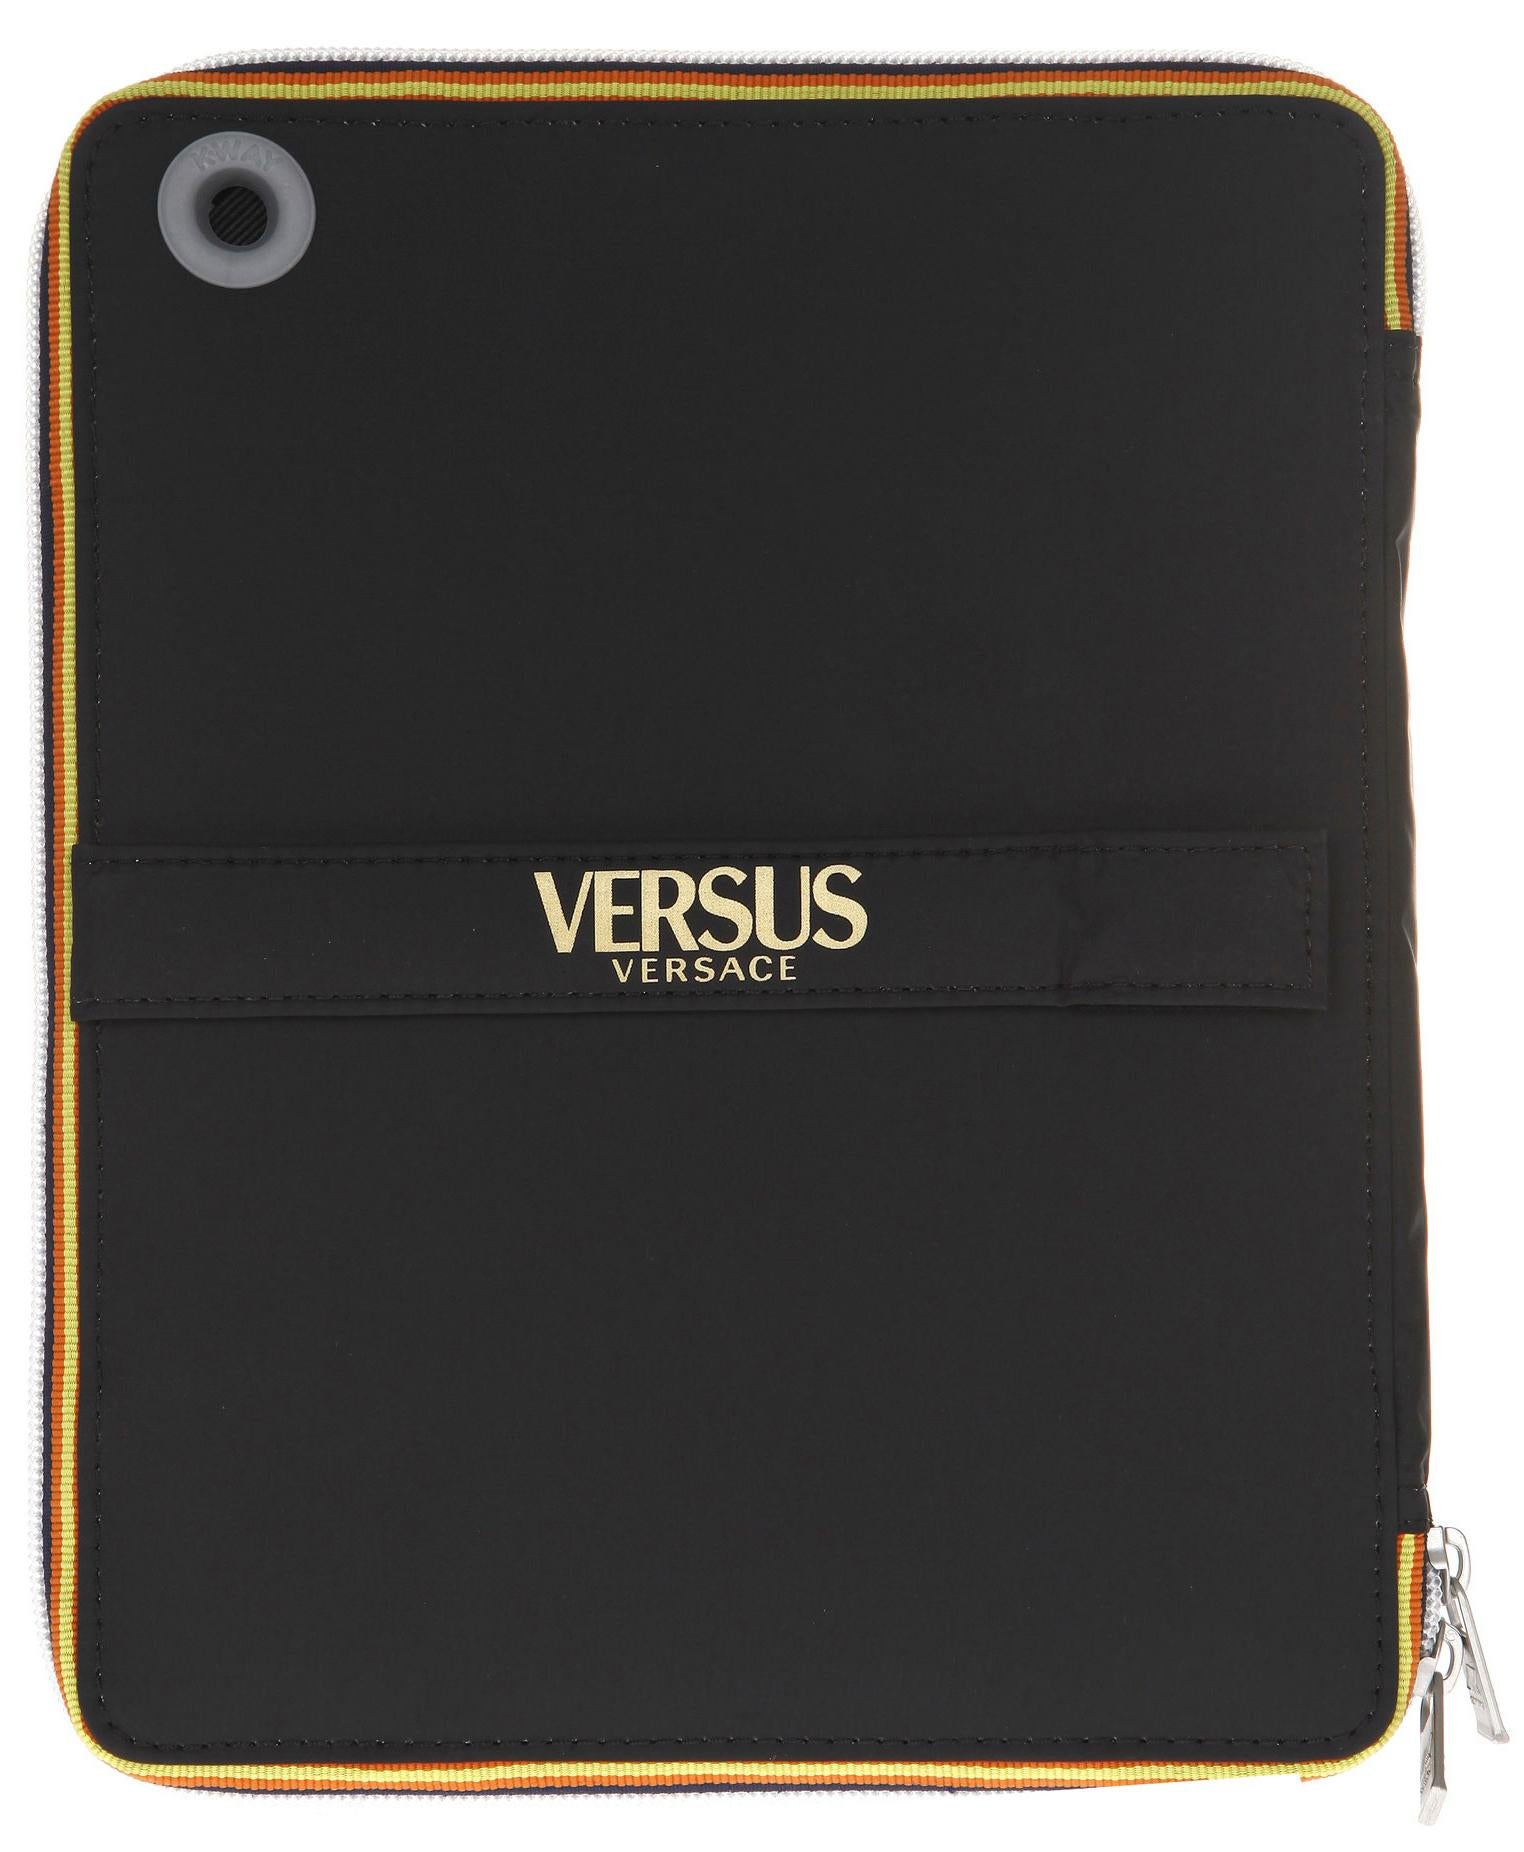 The K-Way x Versus Versace iPad cover would definitely dress up your tablet.

Of the collaboration, Donatella Versace noted, 
